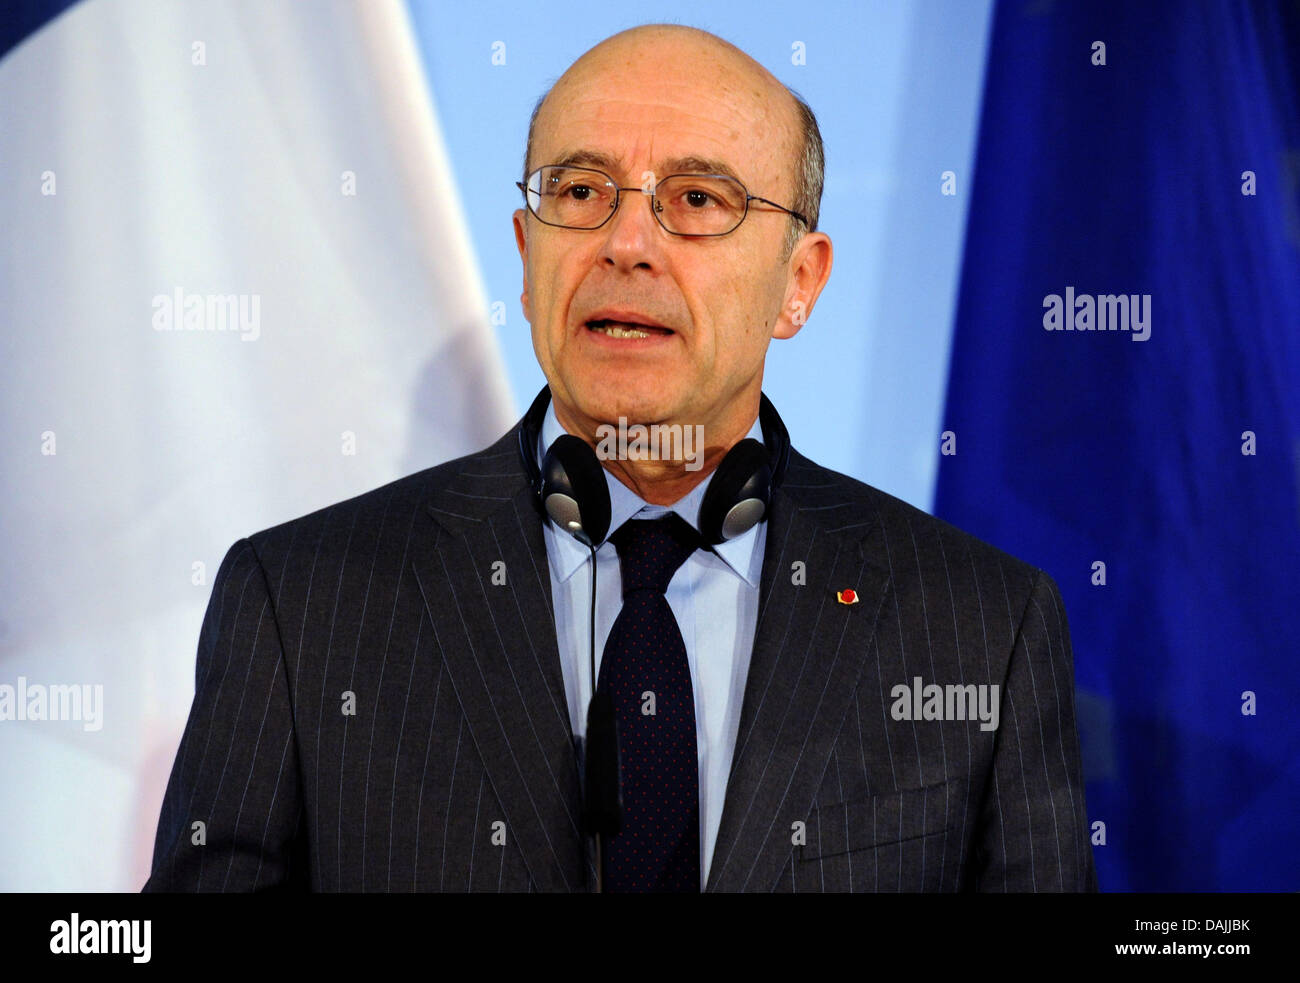 French Foreign Minister Alain Juppe speaks at a press conference in Berlin, Germany, 14 April 2011. NATO Foreign Ministers meet in Berlin to discuss Libya, Afghanistan and missile defence. Photo: MAURIZIO GAMBARINI Stock Photo